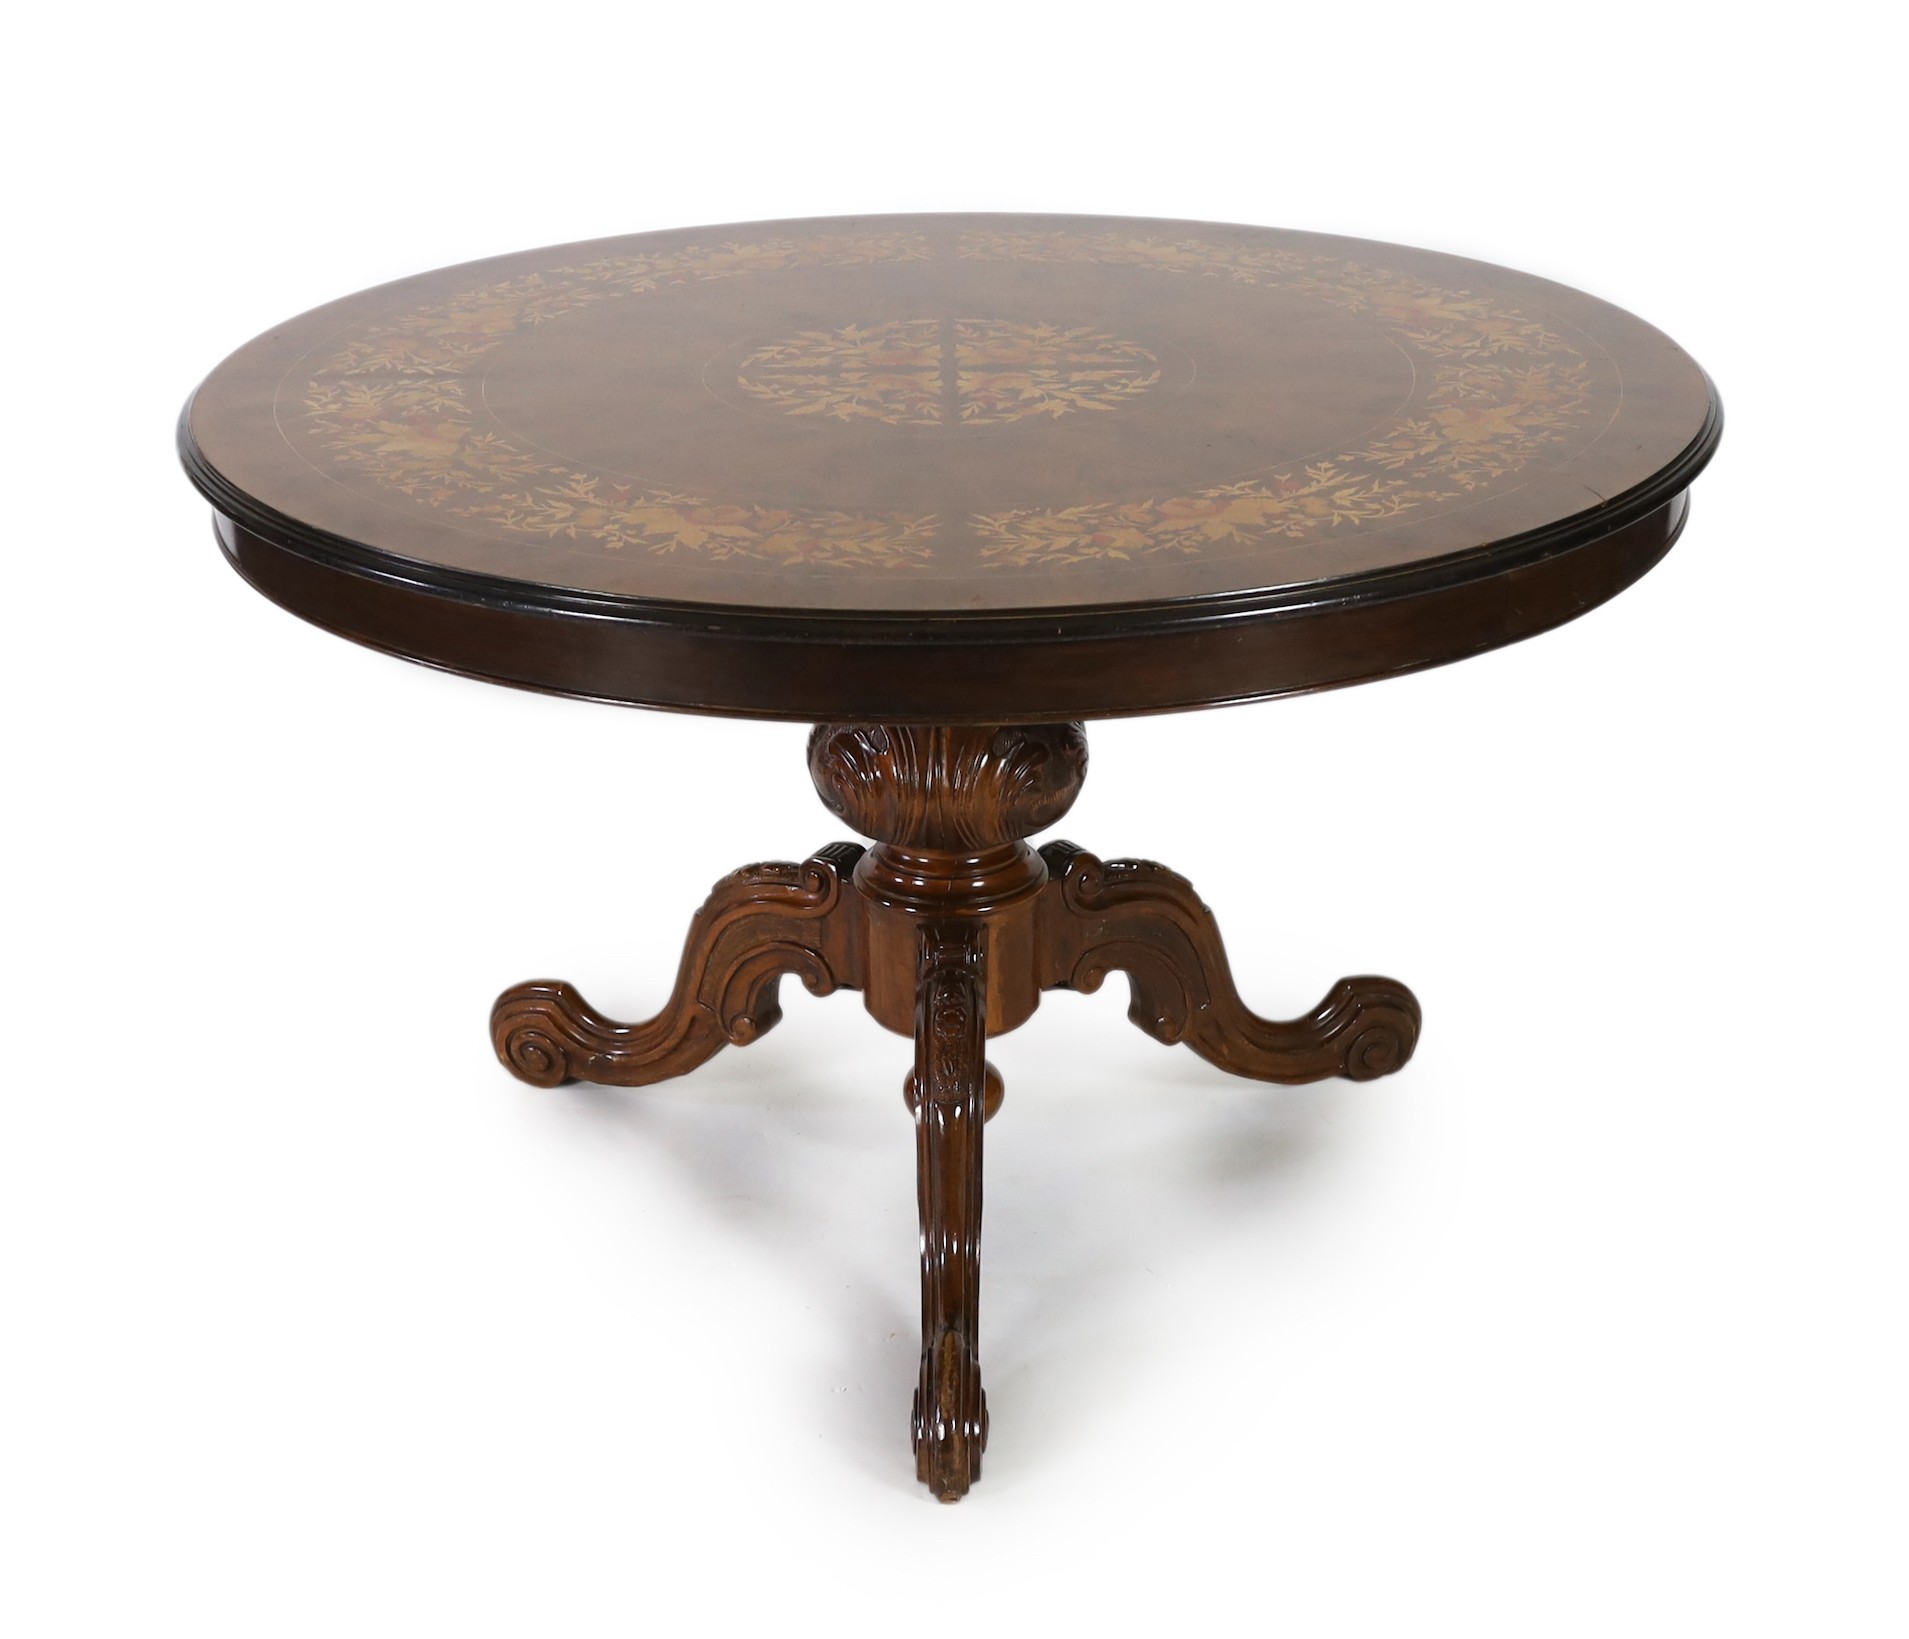 A Victorian style walnut and marquetry breakfast table